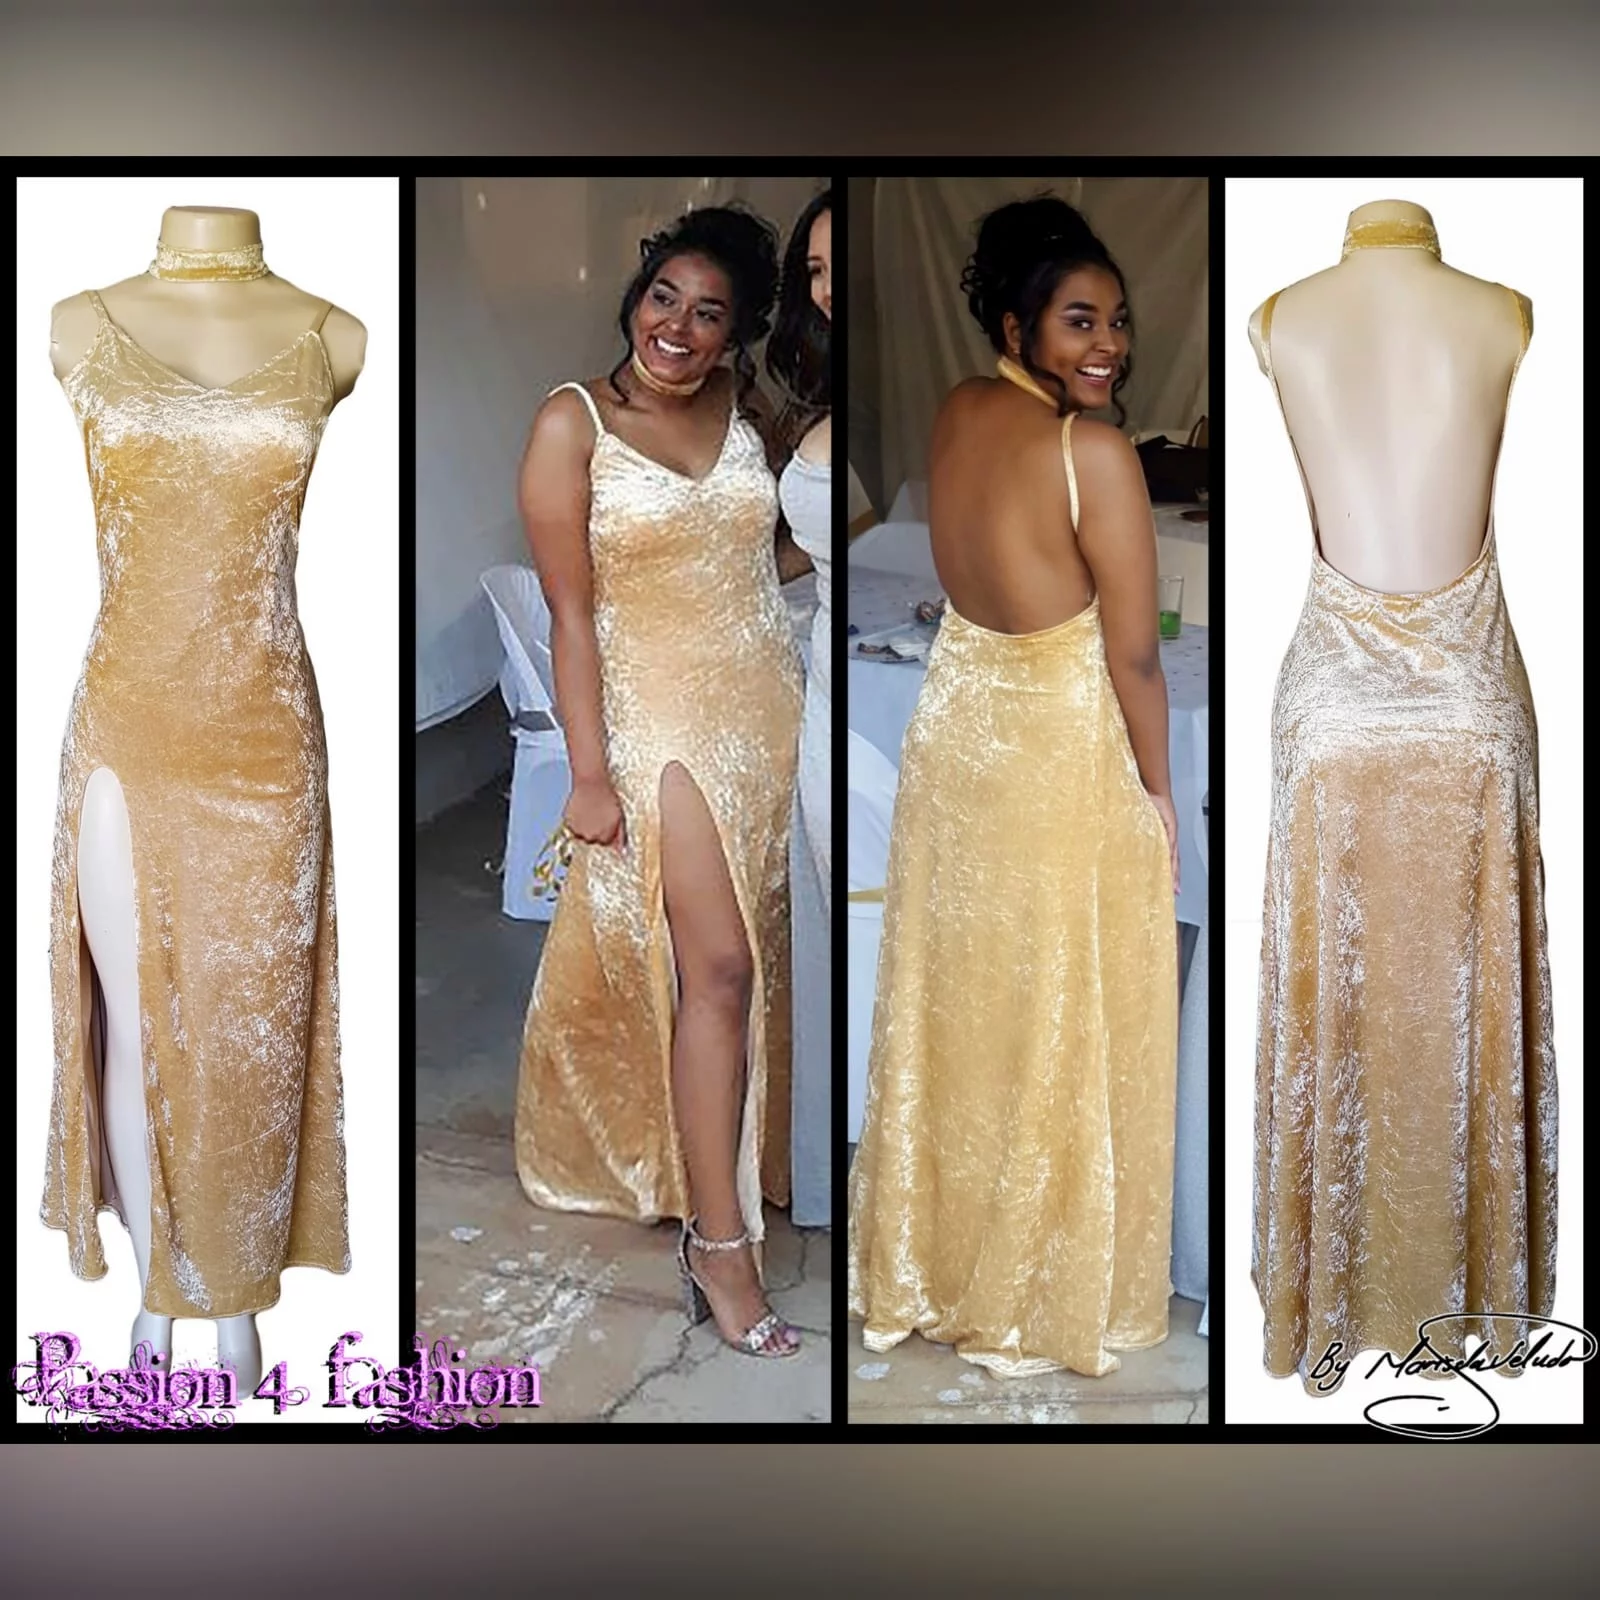 Champagne velvet long prom dress 3 champagne velvet long prom dress with a v neckline, rounded backless design with a high slit and a matching choker.